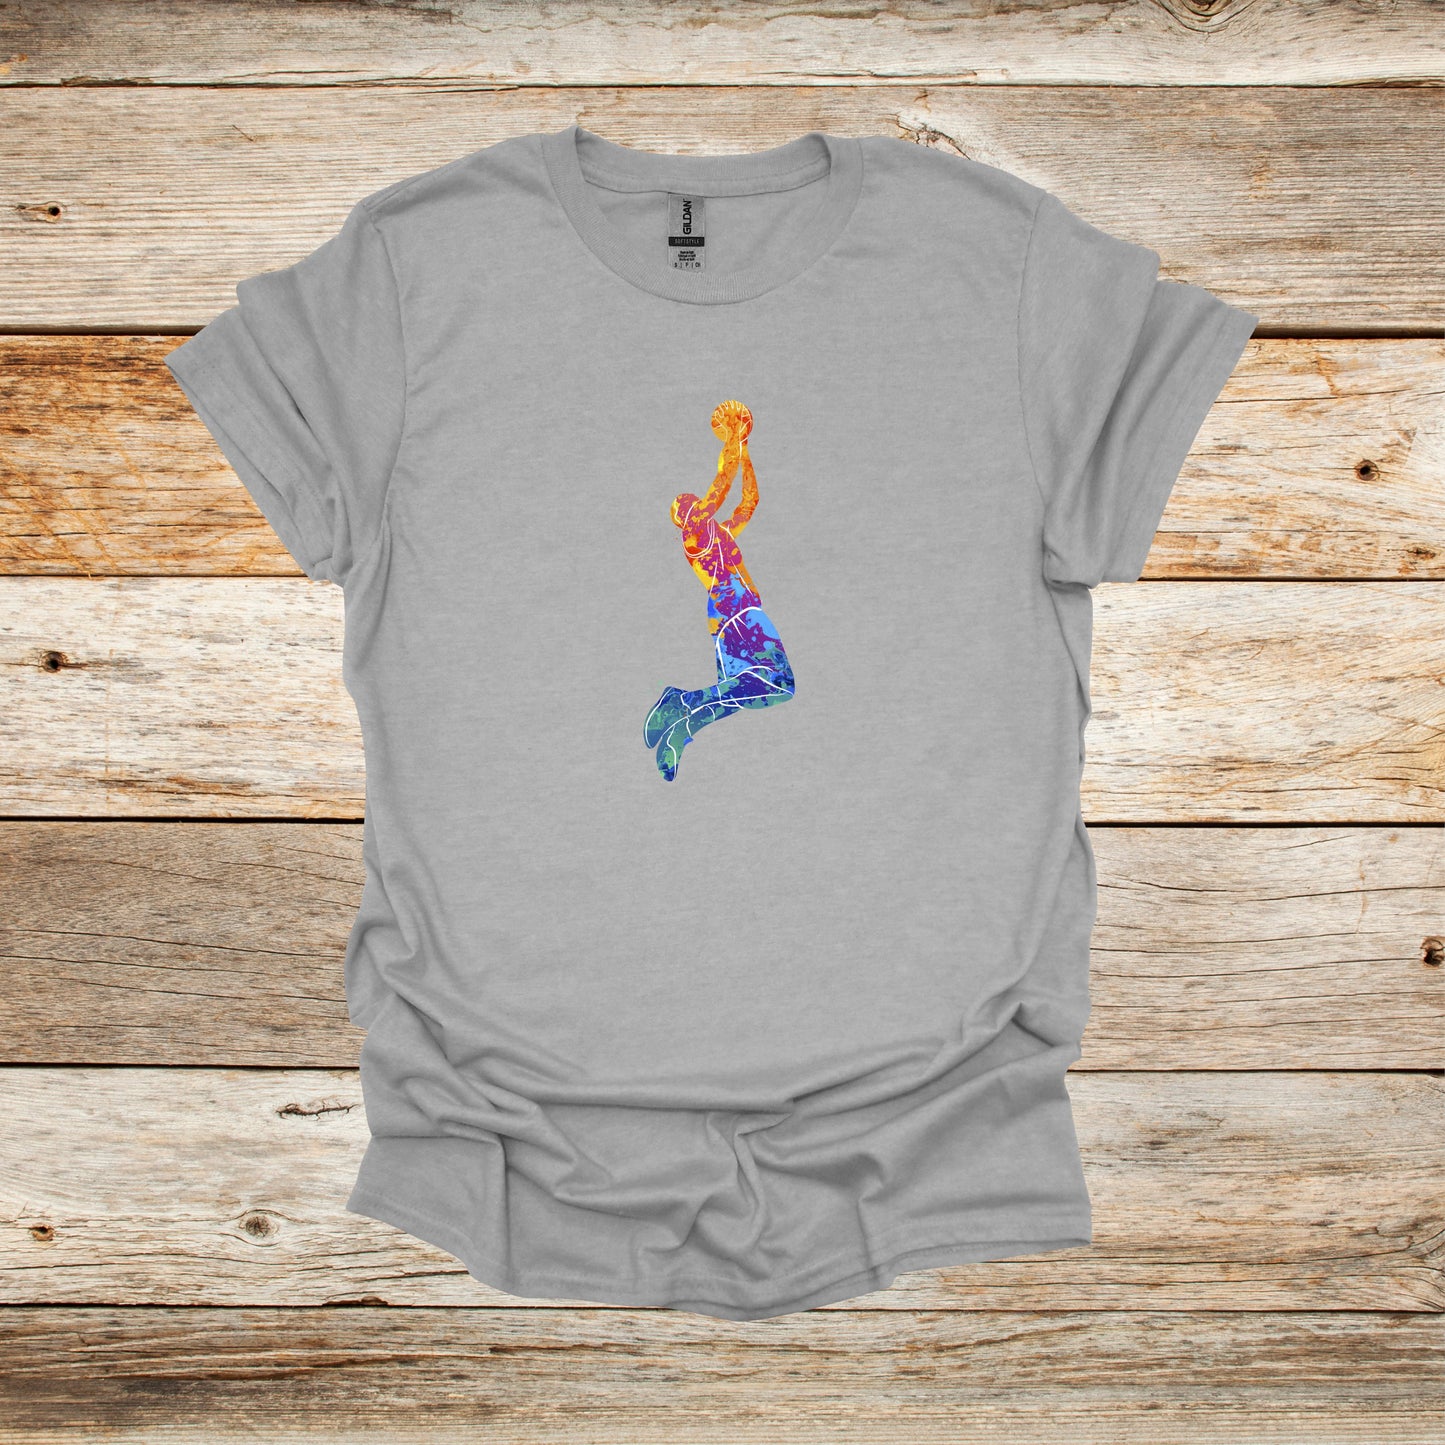 Basketball T-Shirt - Jump Shot - Adult and Children's Tee Shirts - Sports T-Shirts Graphic Avenue Sport Grey Adult Small 